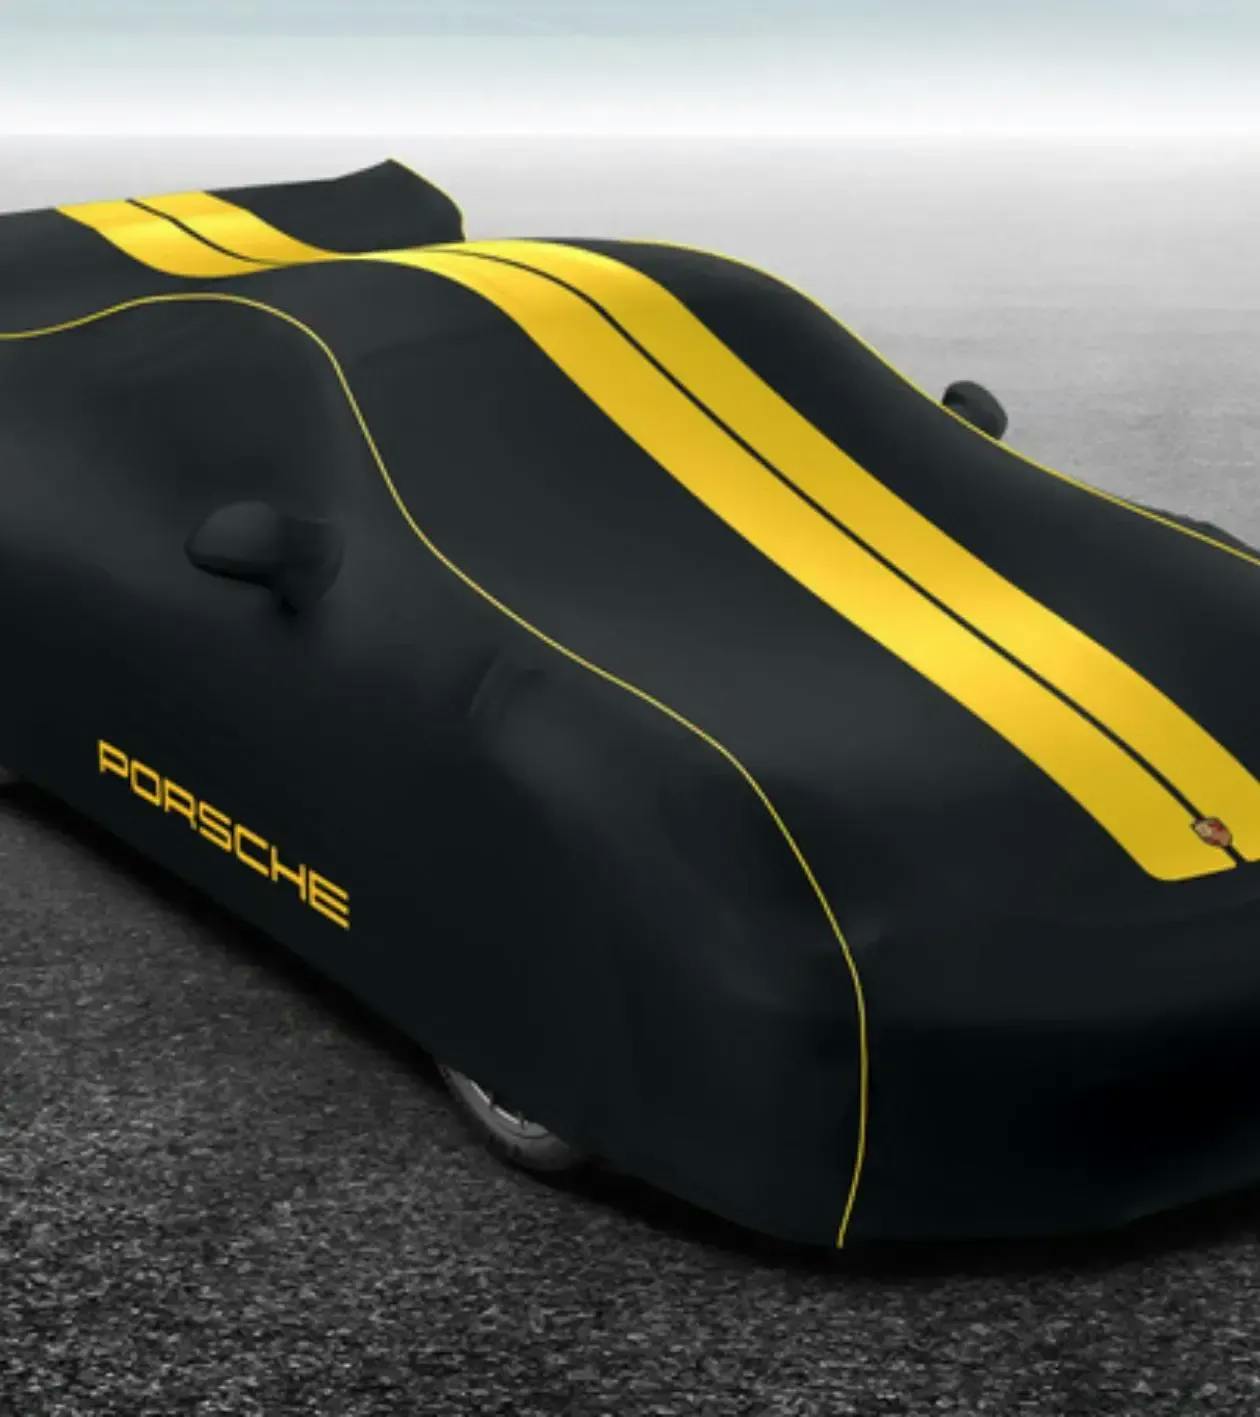 Cayman Indoor Car Cover